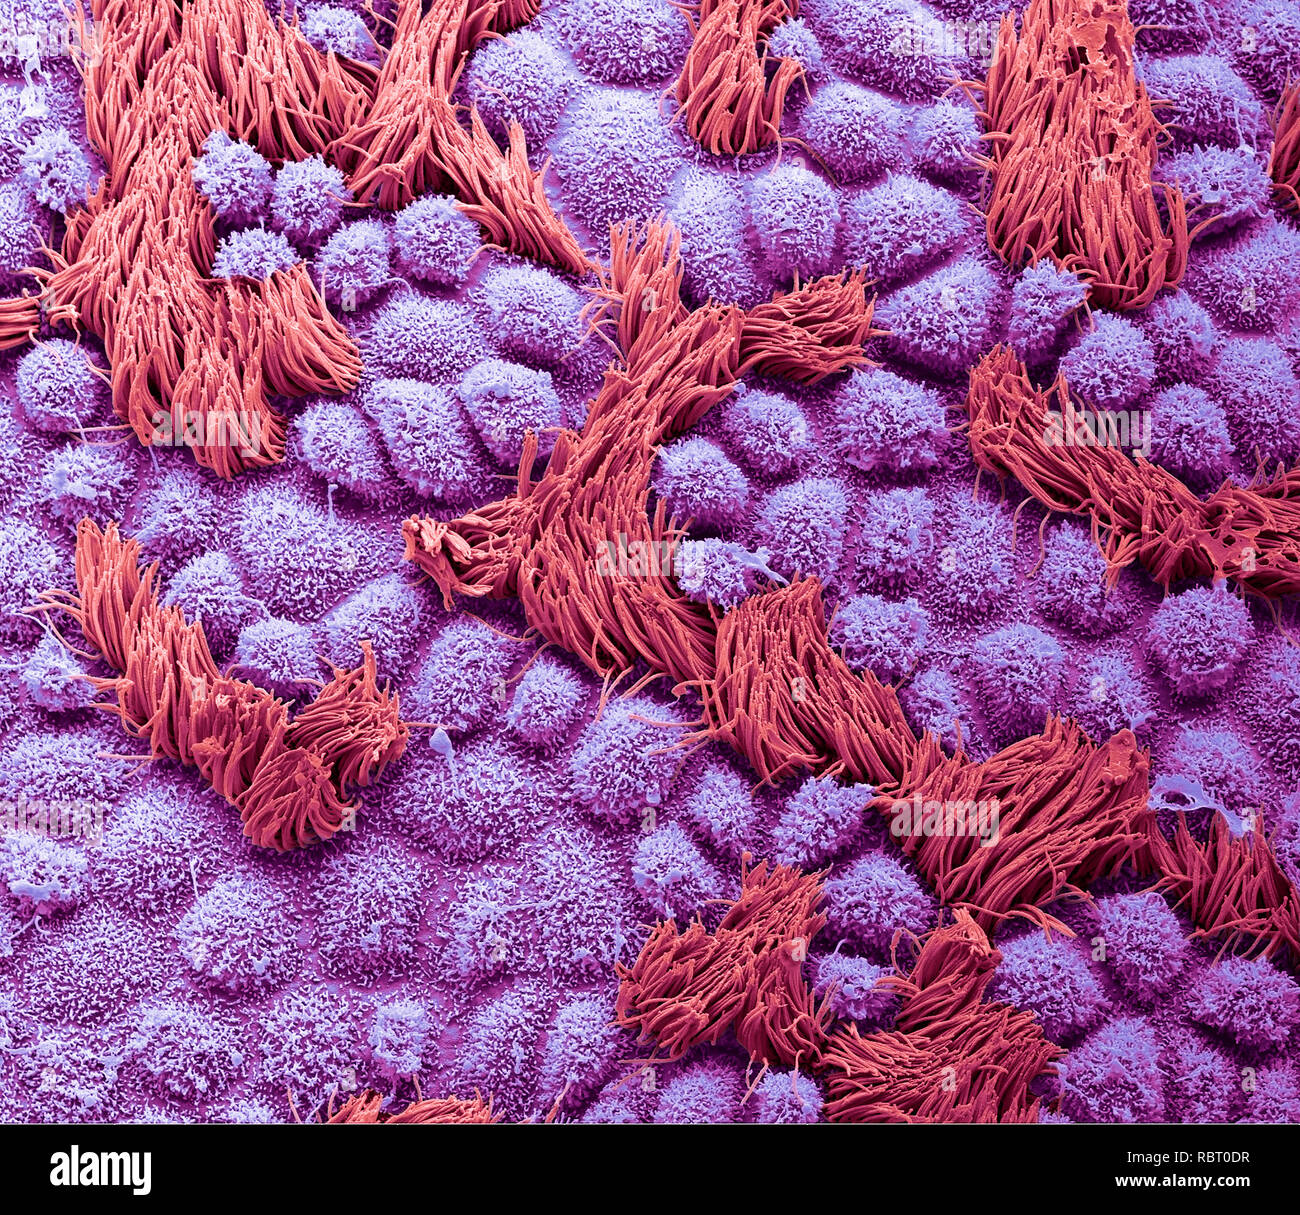 Fallopian tube. Coloured scanning electron micrograph (SEM) of the surface of a human fallopian tube. Fallopian tubes are ducts that lead from the ovaries to the uterus. The epithelium consists of columnar cells, many of which have cilia (red). The cilia beat is towards the uterus, aiding transport of the egg from the ovary. Coloured blue are the secretory cells with their microvilli projections. These cells secrete a substance that maintains a moist environment in the tube and may provide nutrients for the egg. Magnification: x2000 when printed at 10 centimetres wide. Stock Photo